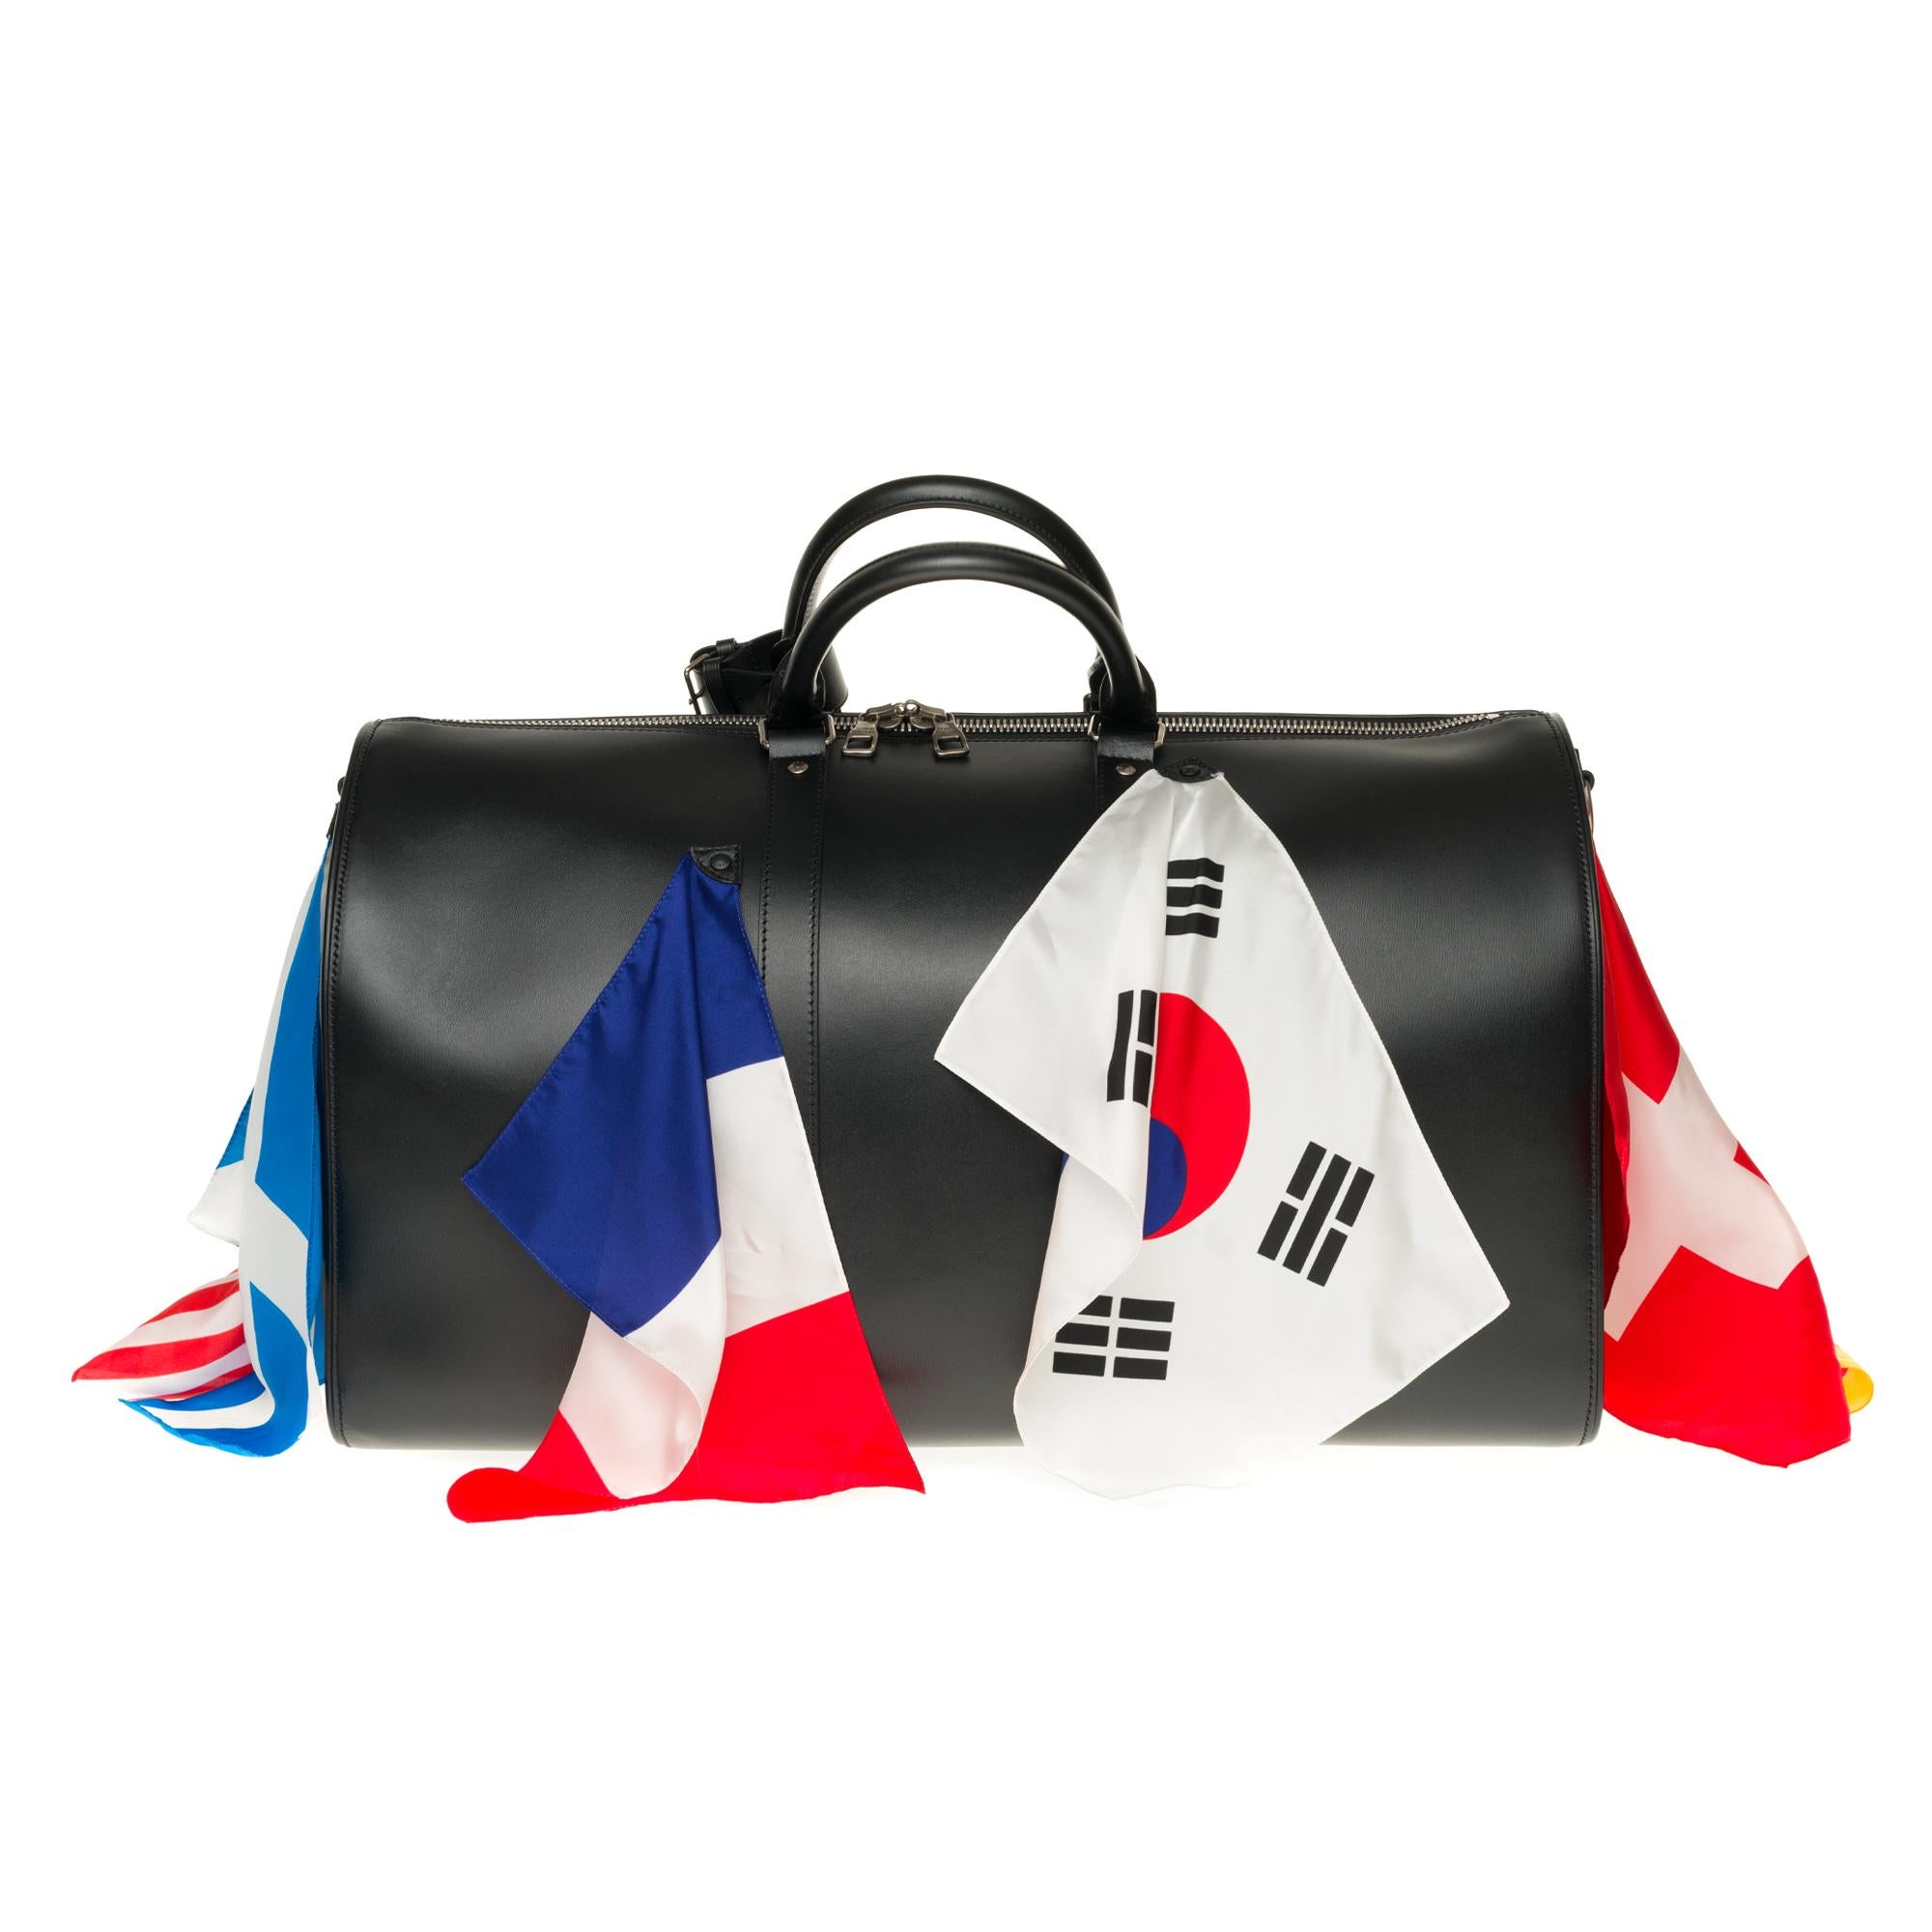 Ultra exclusive piece from the Fashion show LV 2020 - SOLD OUT

The Keepall Bandoulière 50 is fashioned from calf leather and festooned with flags. For Men’s Artistic Director Virgil Abloh, flags are “the humanitarian pop symbols for our times.”